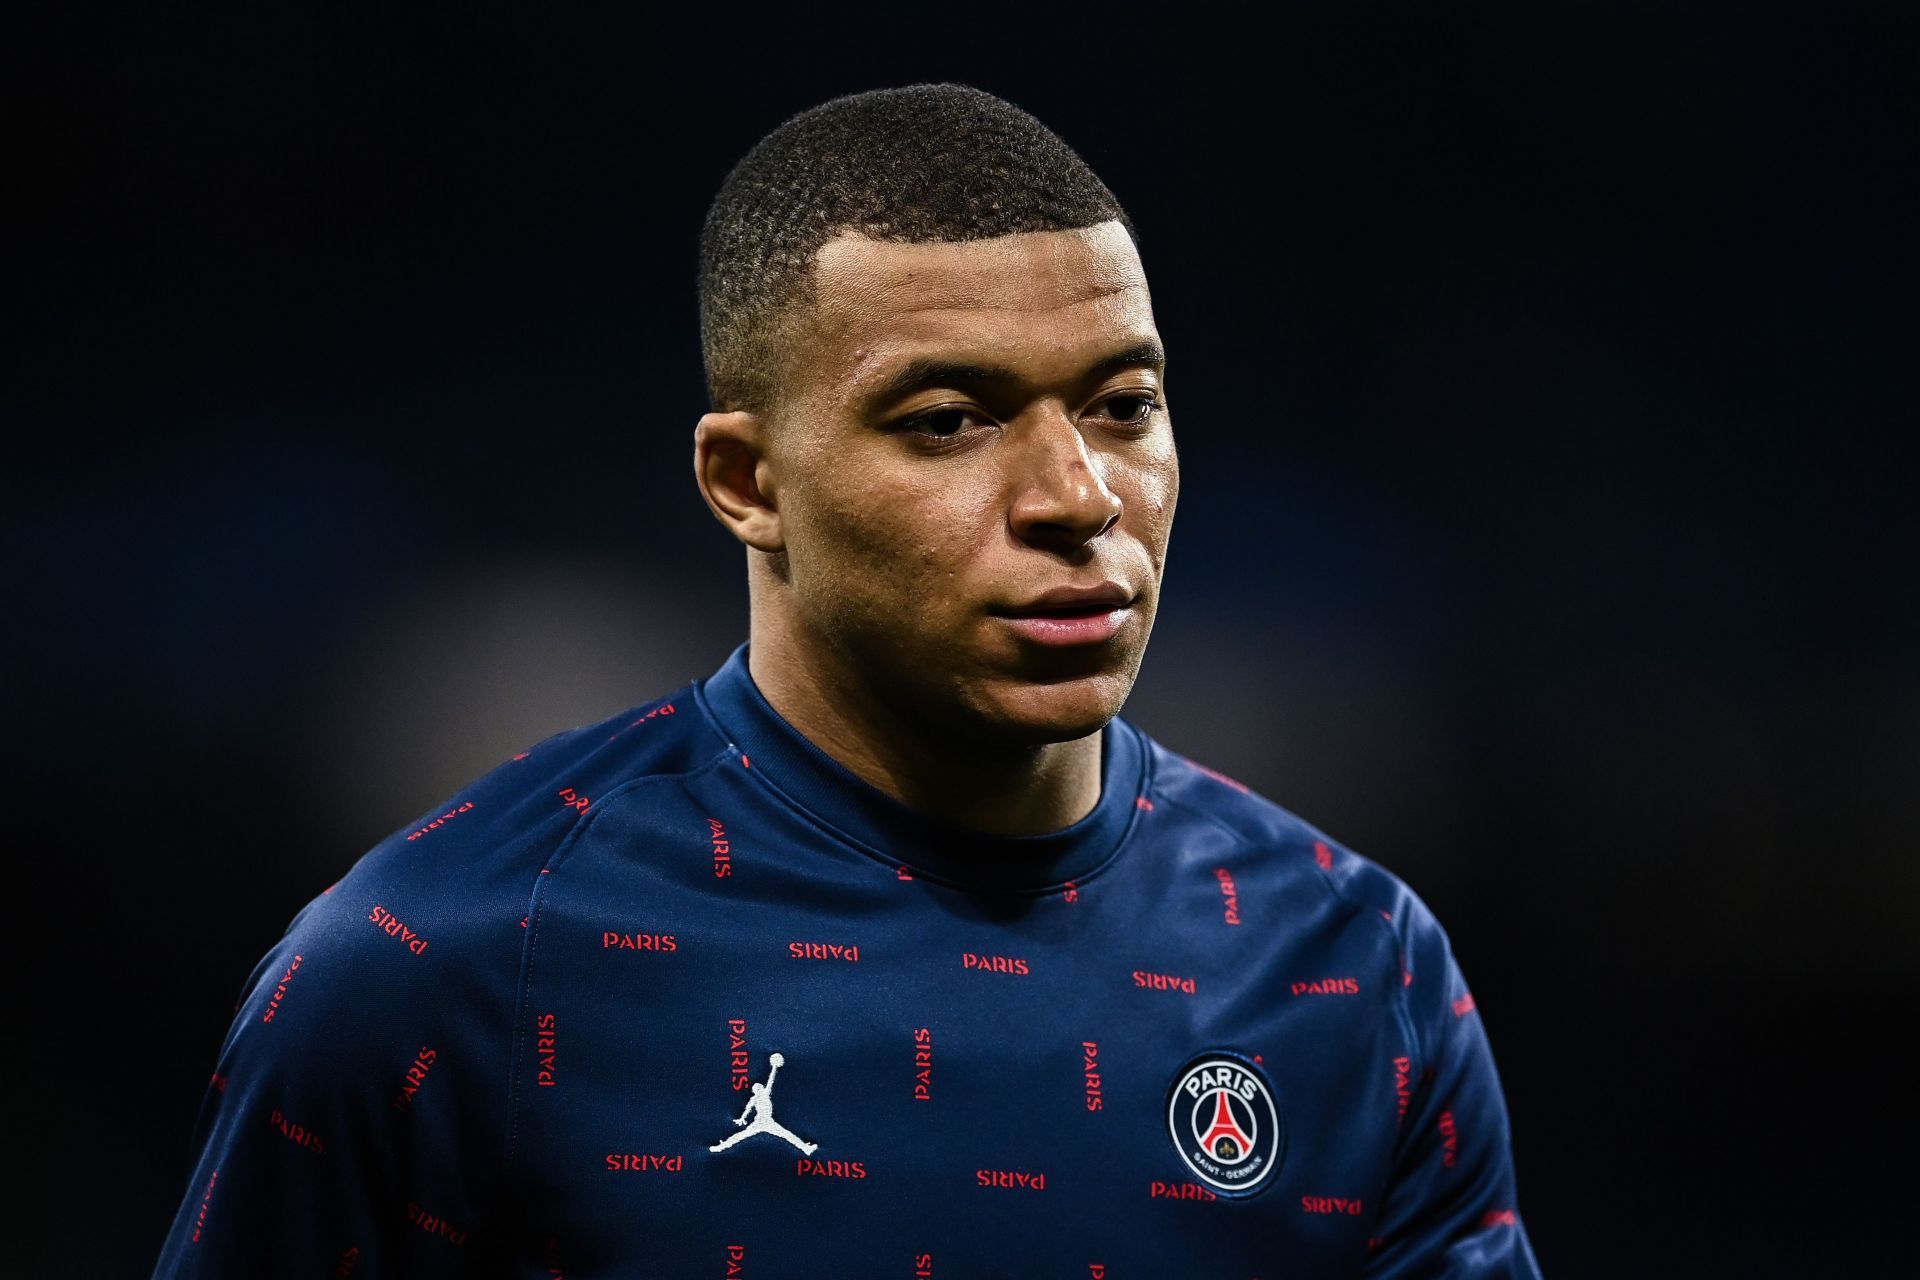 Kylian Mbappe is likely to leave the Parc des Princes this summer